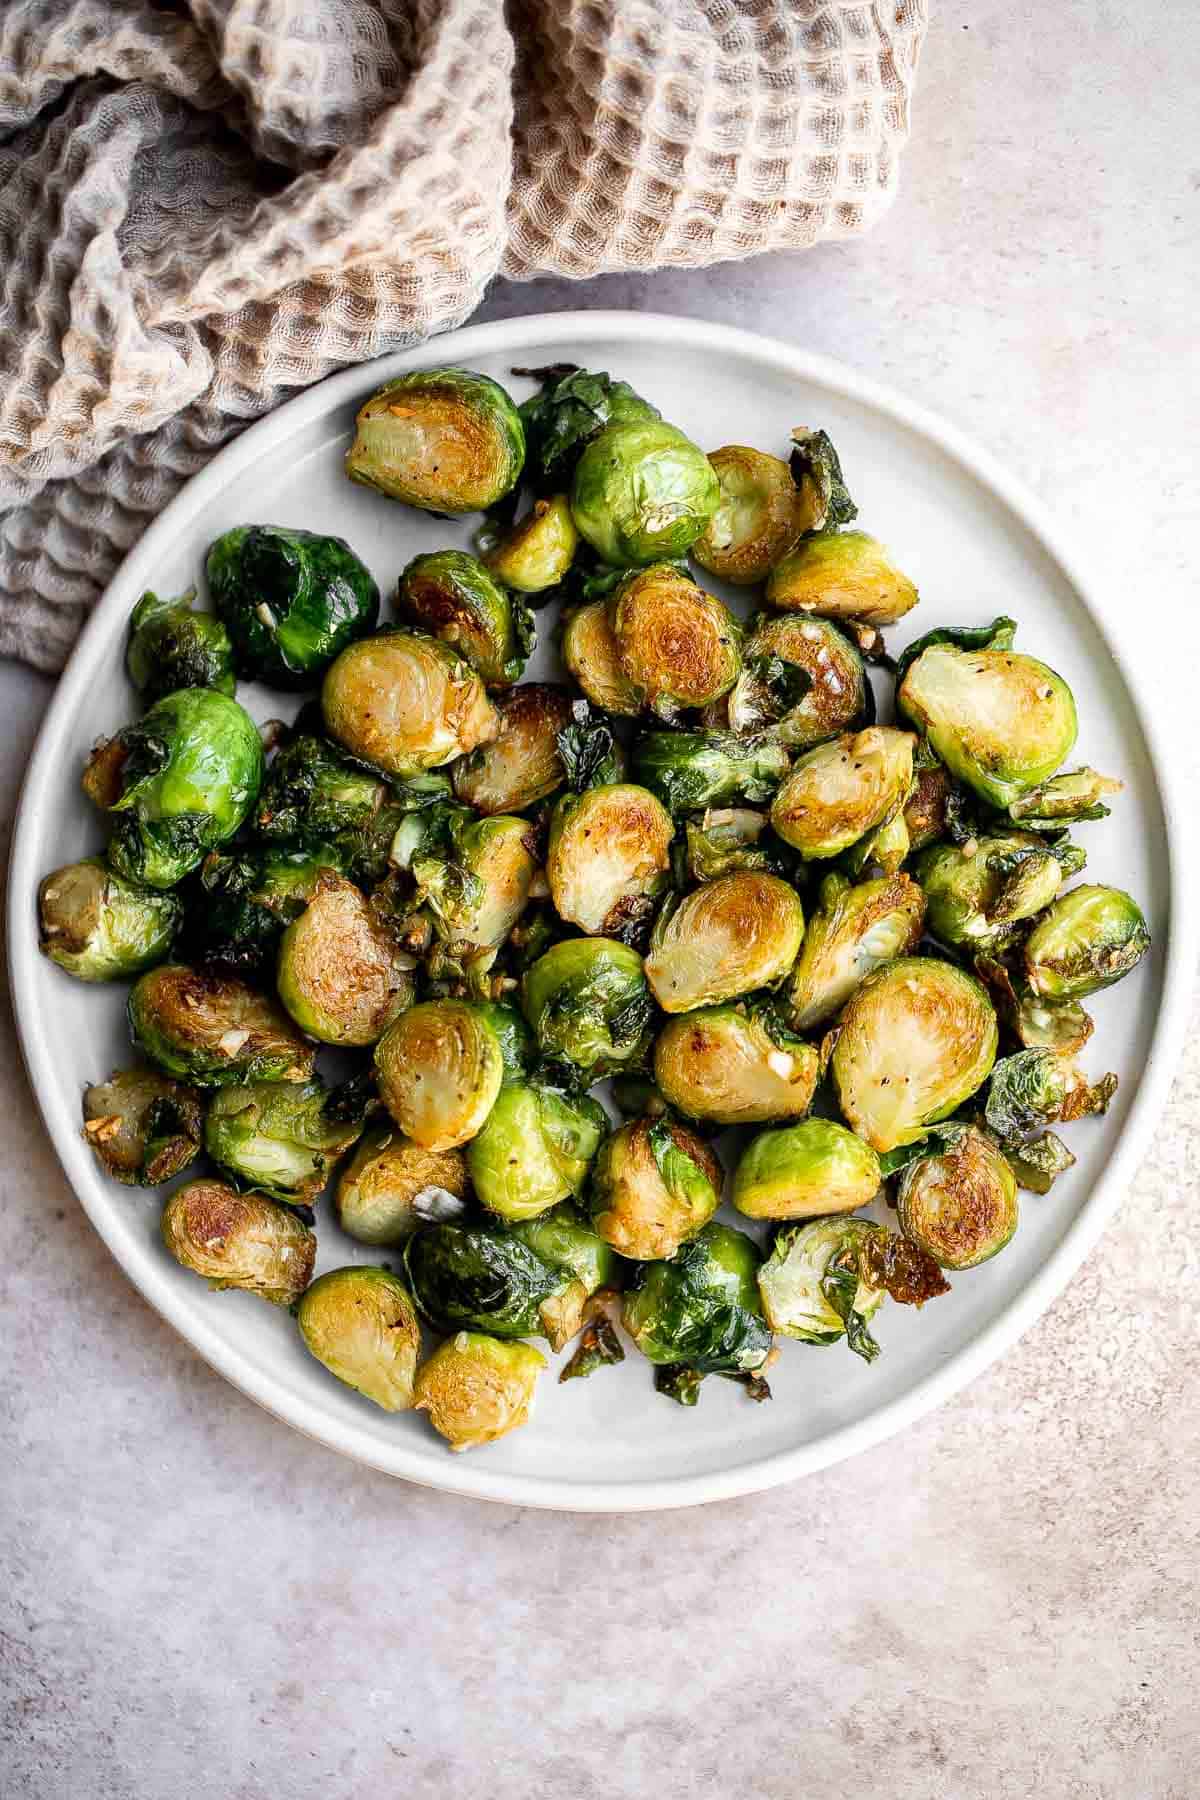 Sautéed Brussels Sprouts are a quick and easy side dish made with just 5 ingredients and ready to serve in only 15 minutes. They're vegan and keto too. | aheadofthyme.com